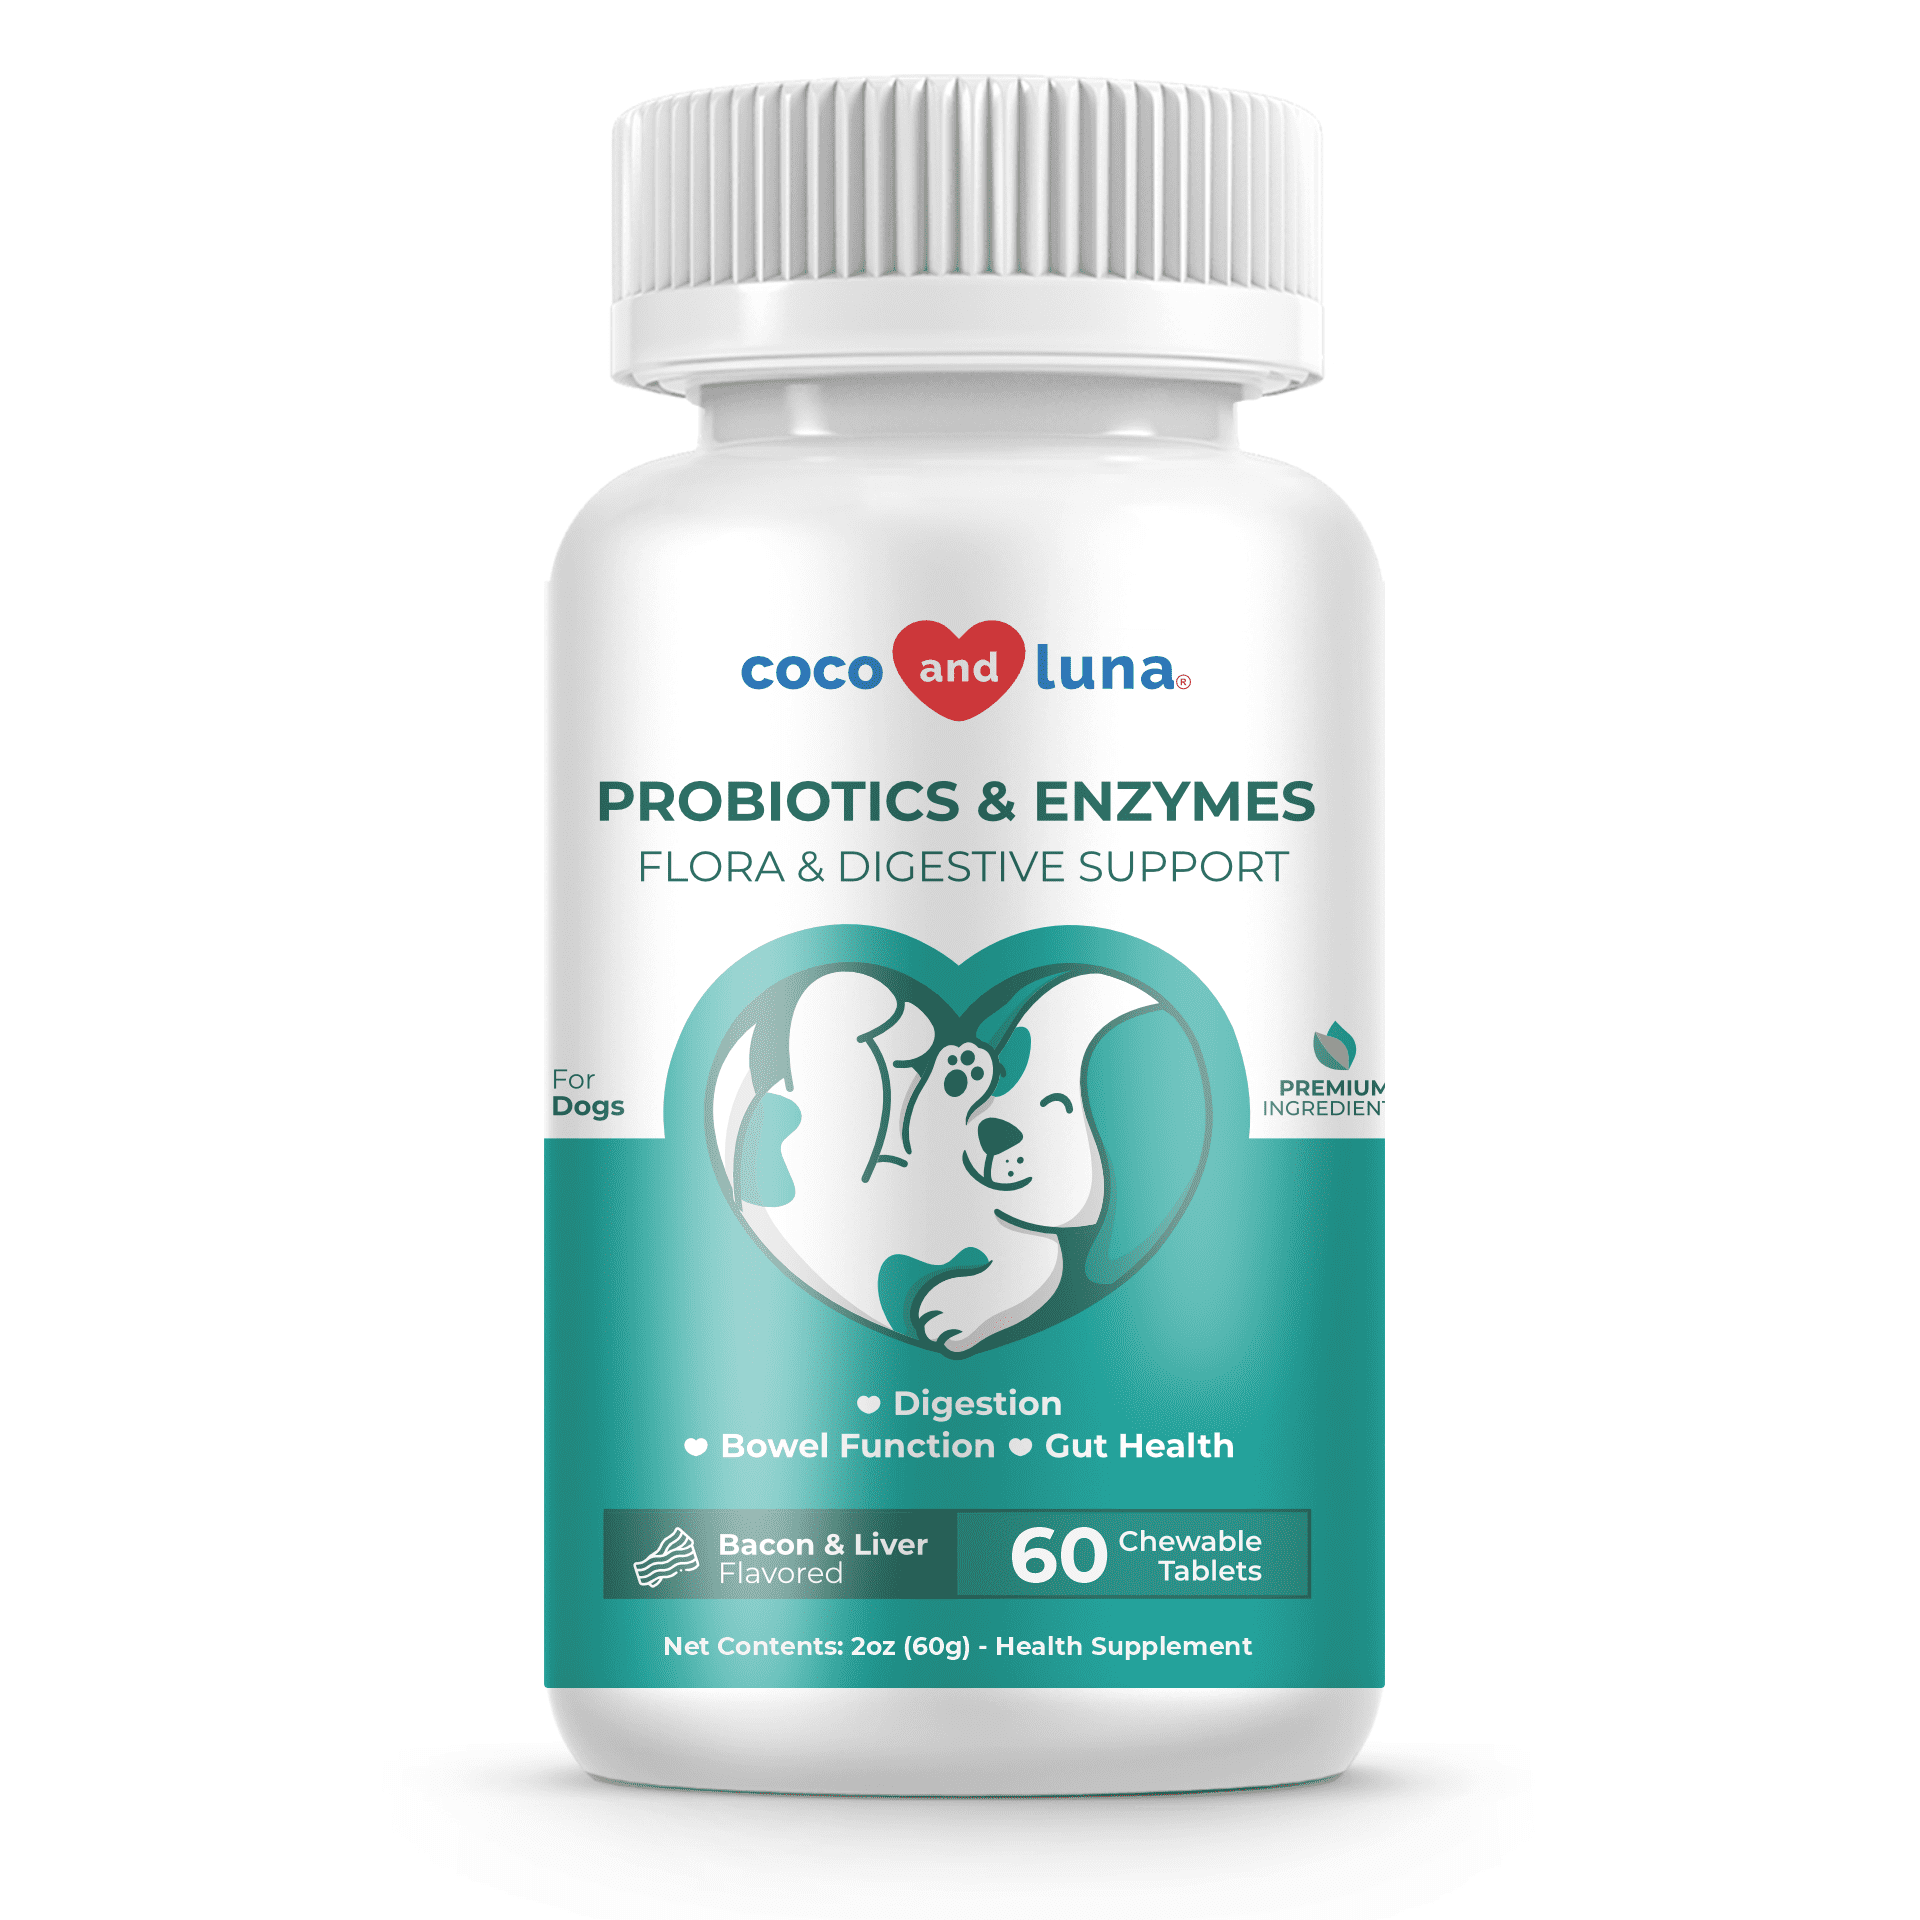 Probiotics and Enzymes for Dogs - 60 Chewable Tablets - Coco and Luna